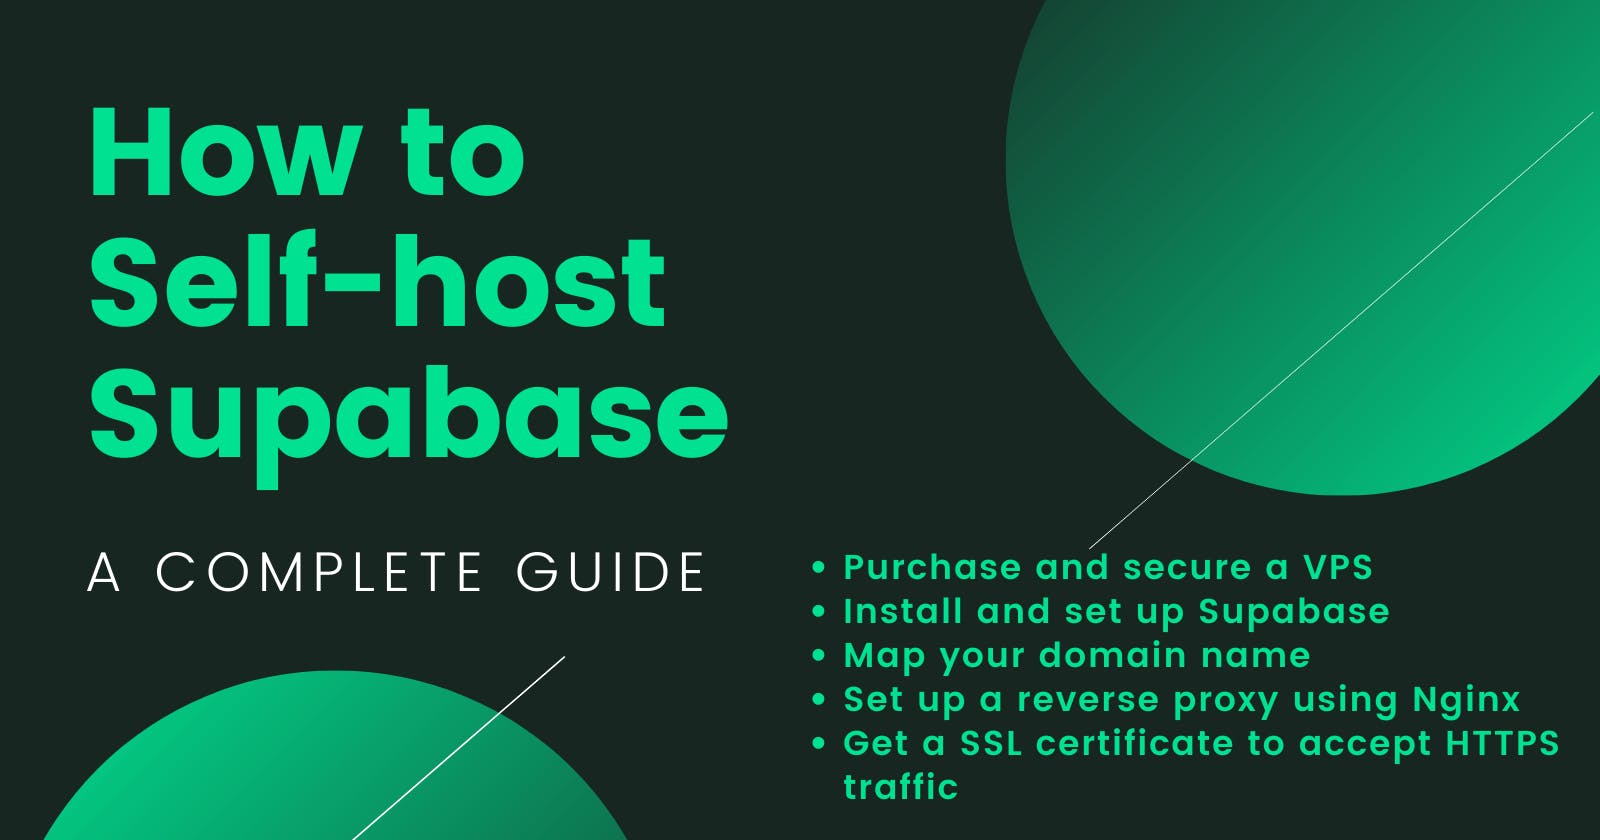 How to Self-host Supabase: A complete guide